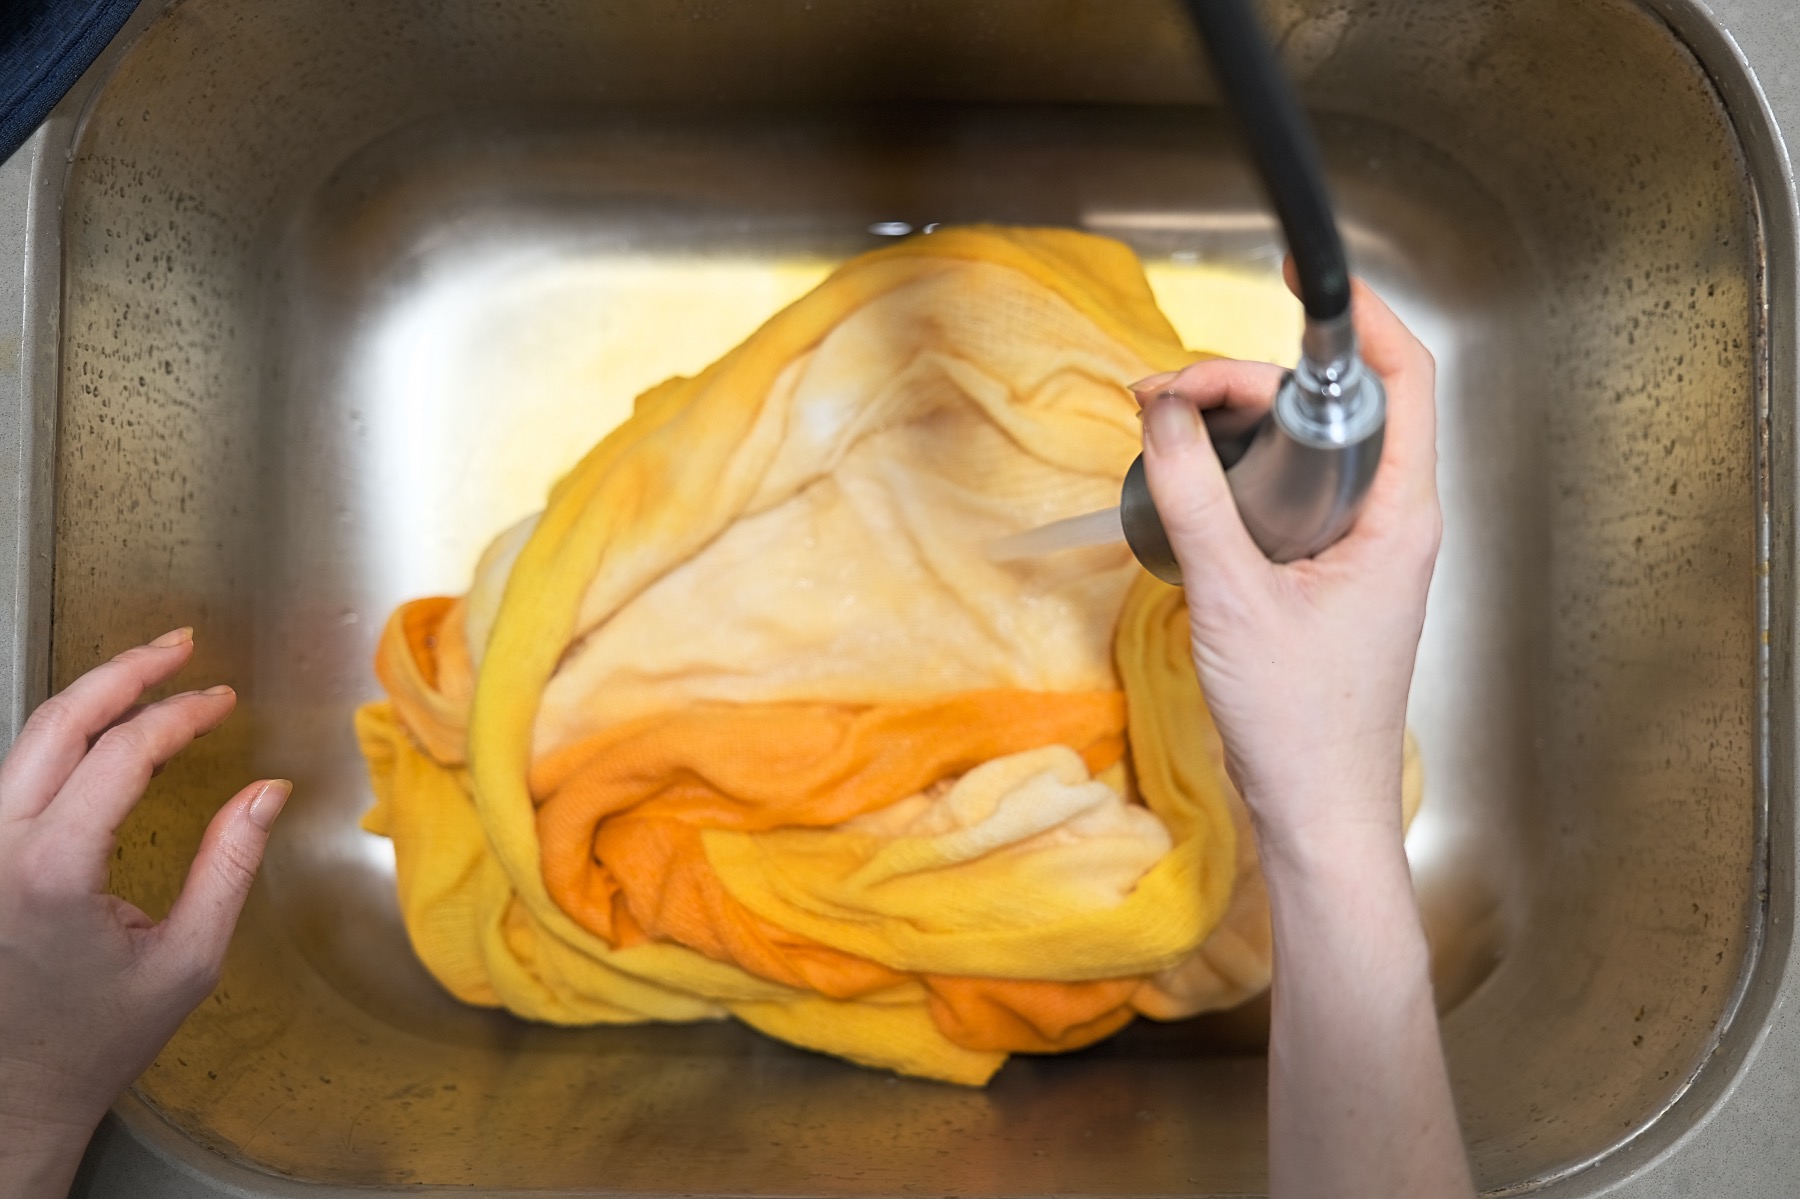 rinse the dyed blanket until water runs clear